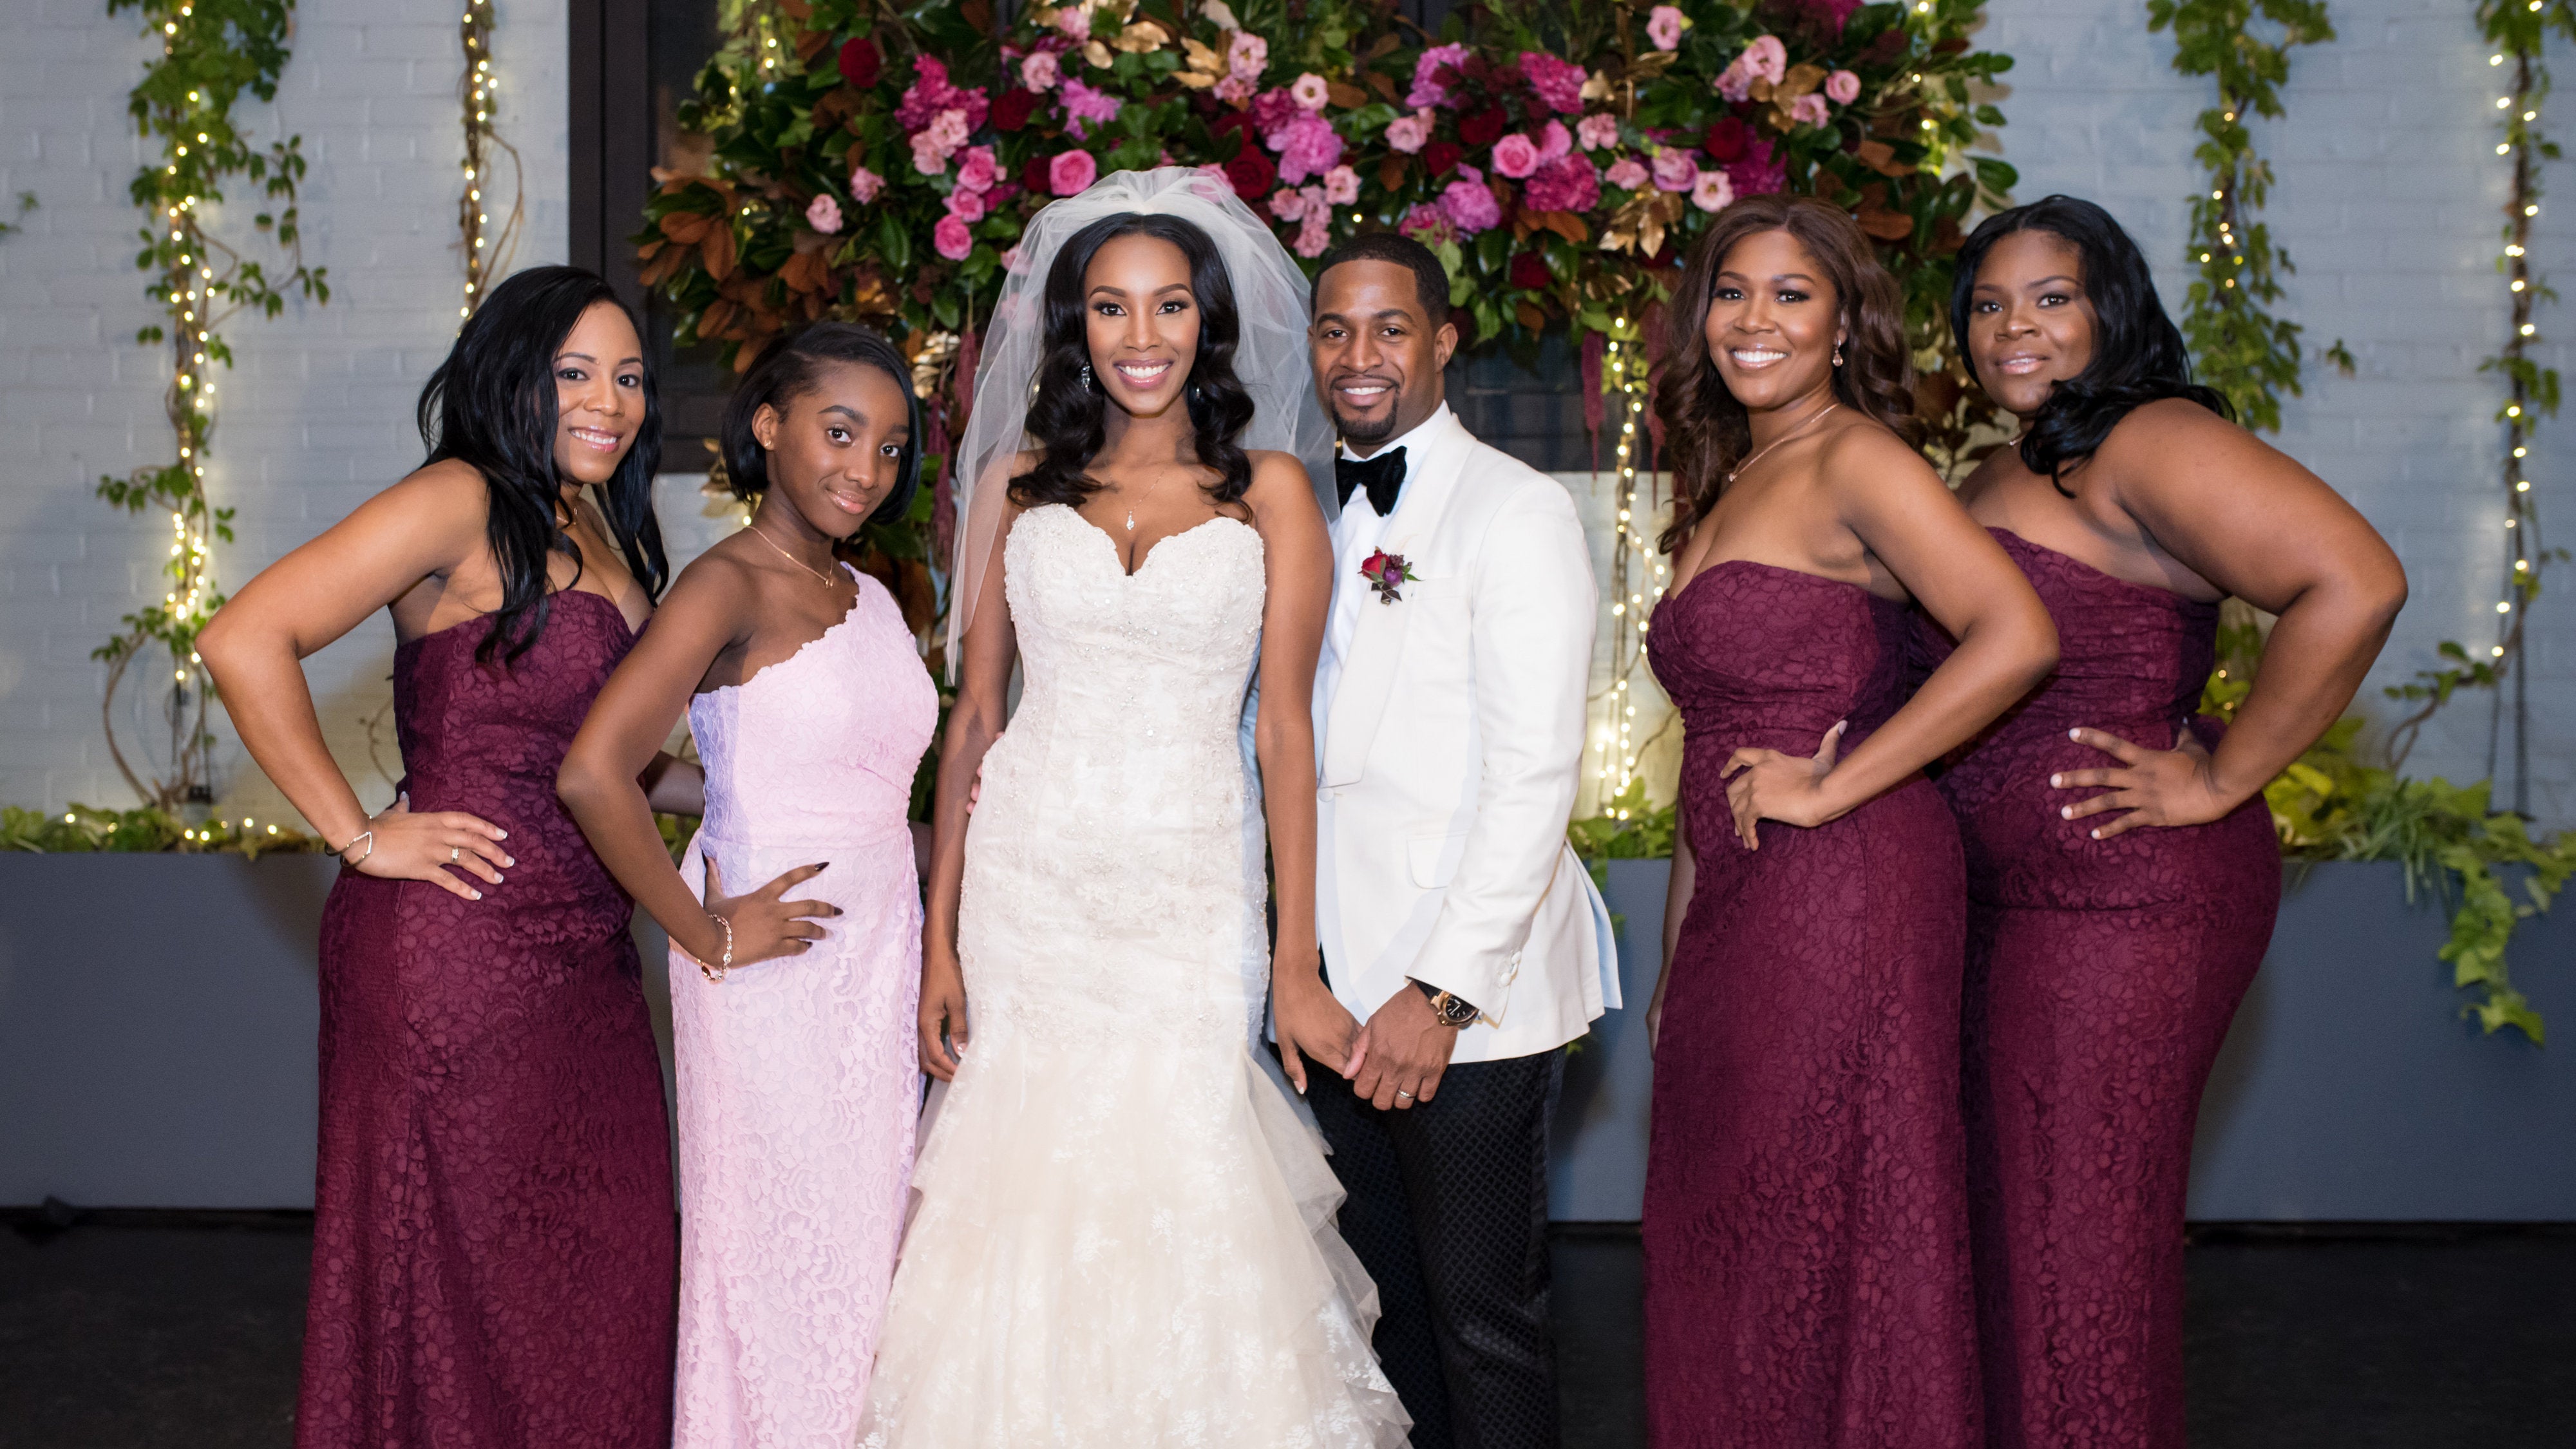 Bridal Bliss: Omari and Shadeen's New York Wedding Was Filled With Classic Romance Vibes
